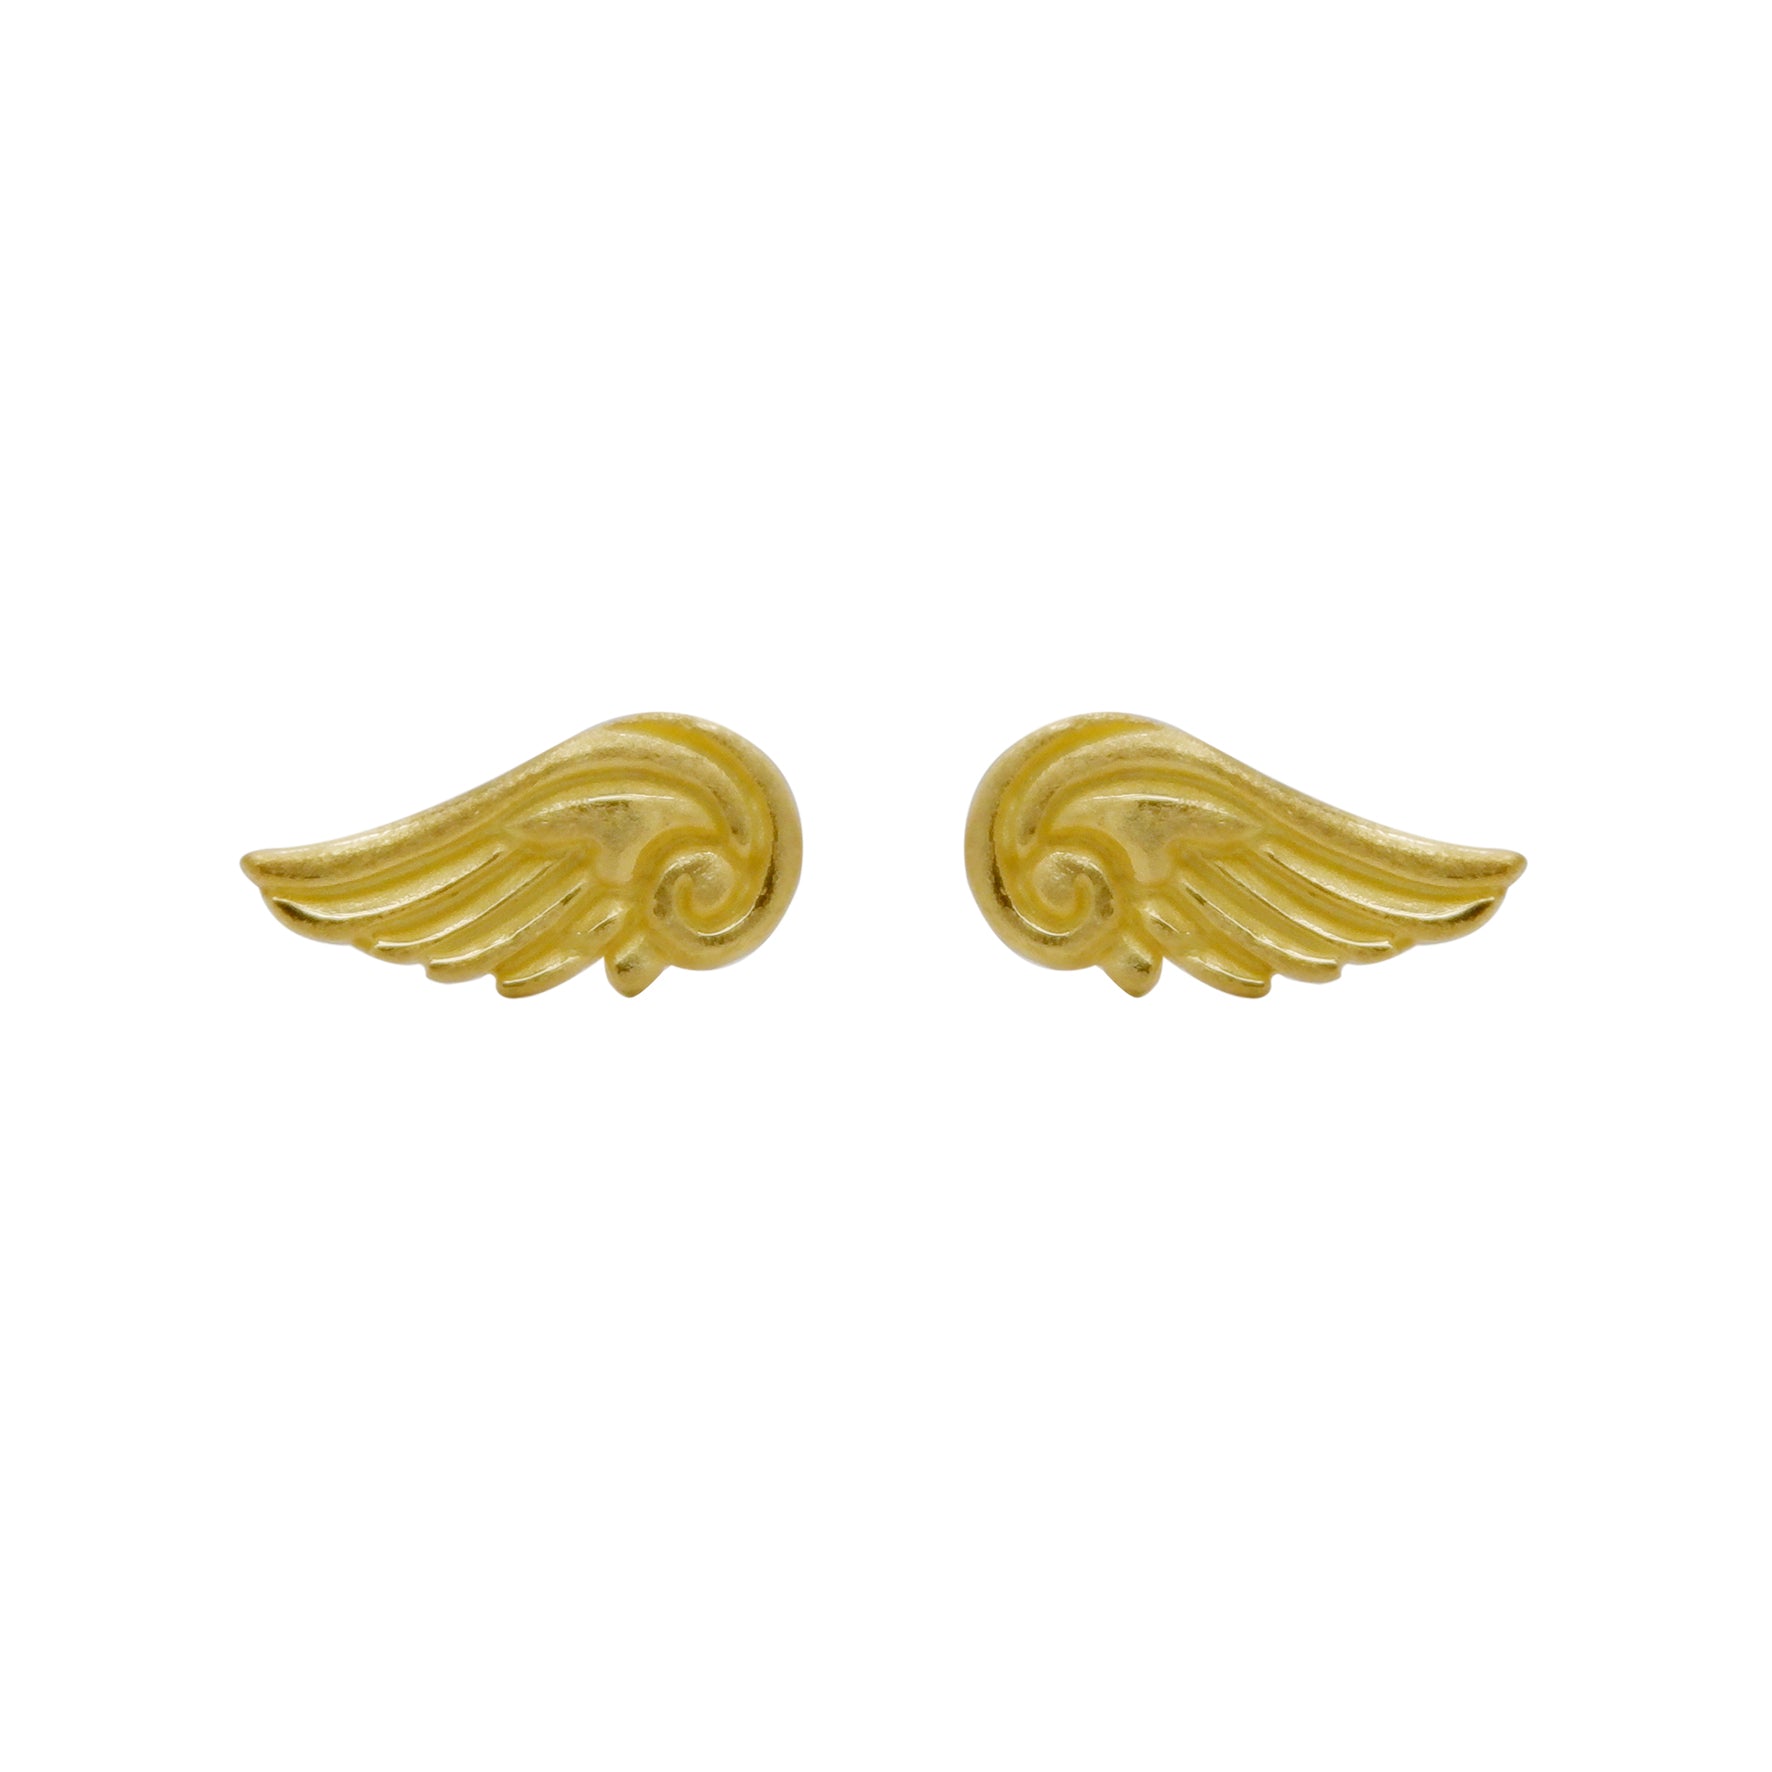 Hunt Of Hounds Arion Stud Earrings in gold. Detailed wing studs. Unisex.